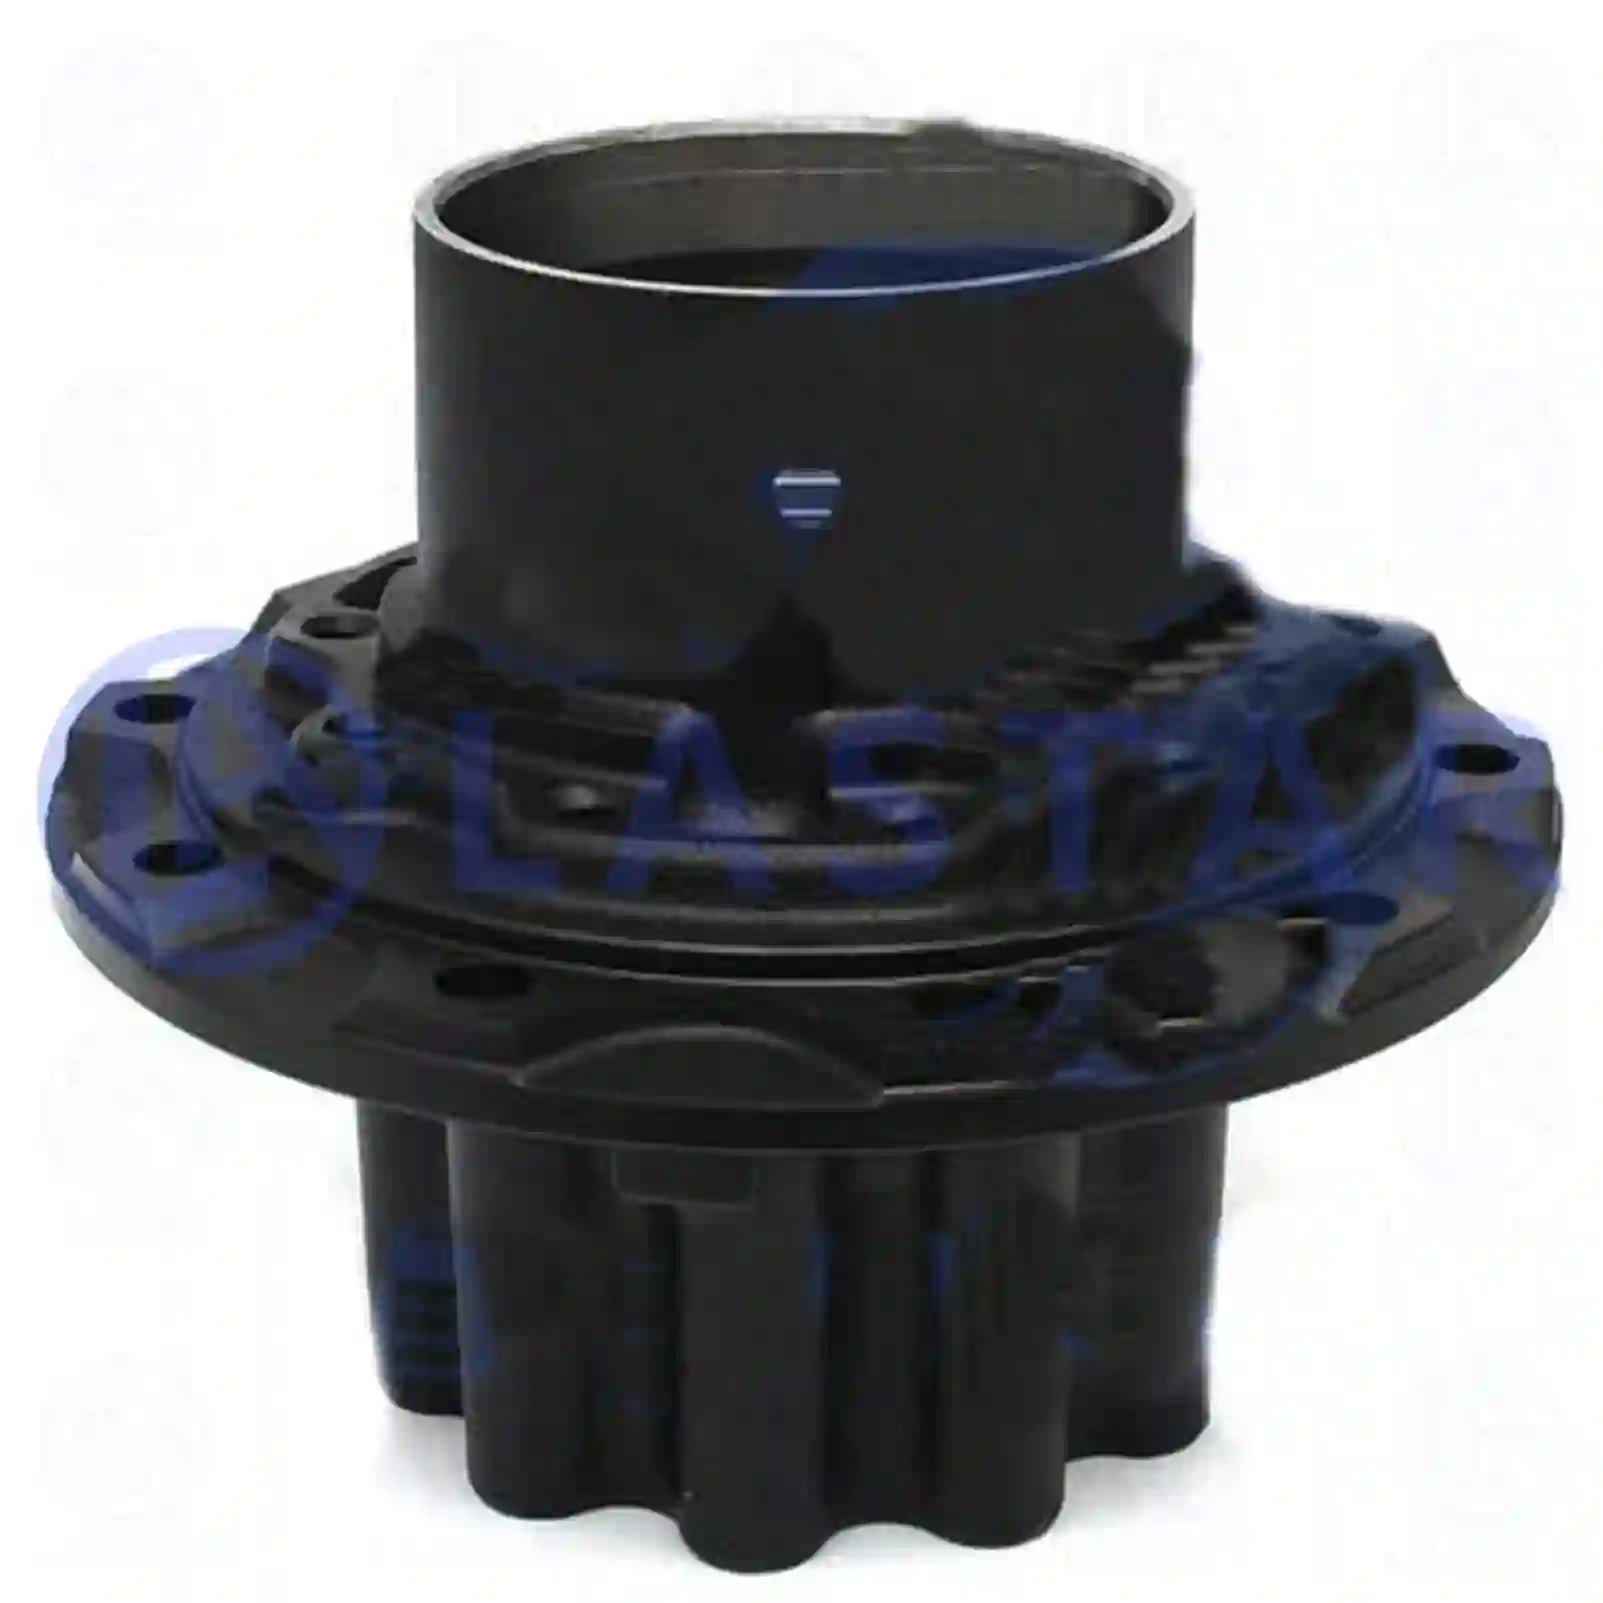 Wheel hub, without bearings, 77726338, 4003560701, 9463560701, , , , , ||  77726338 Lastar Spare Part | Truck Spare Parts, Auotomotive Spare Parts Wheel hub, without bearings, 77726338, 4003560701, 9463560701, , , , , ||  77726338 Lastar Spare Part | Truck Spare Parts, Auotomotive Spare Parts